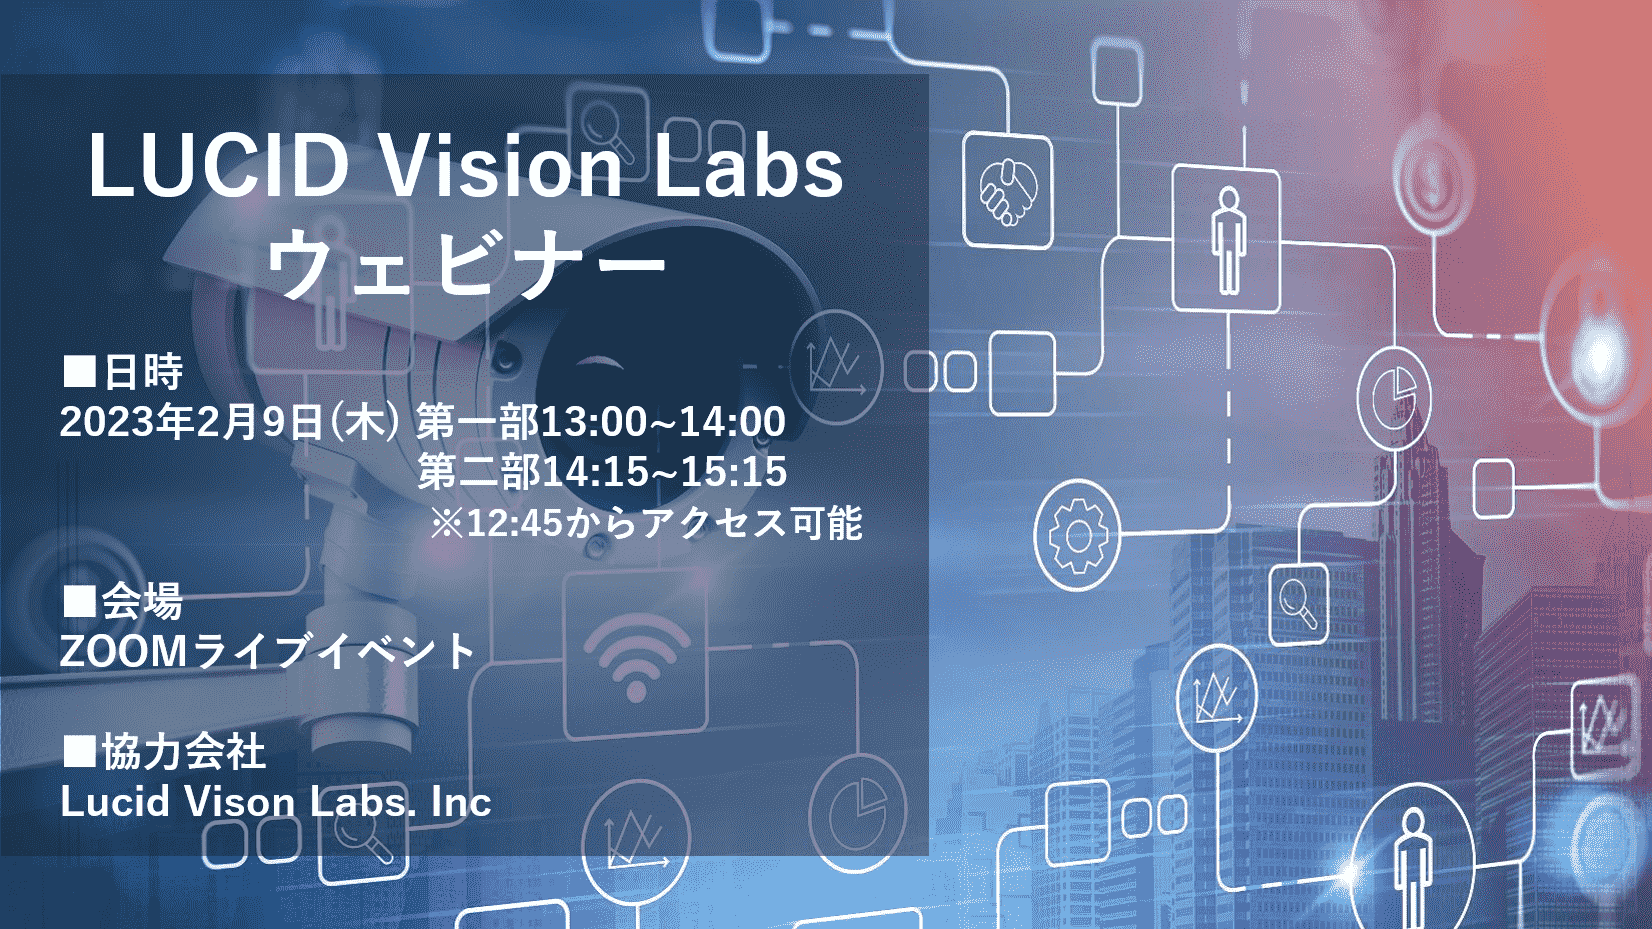 LUCID Vision Labs ウェビナーのご案内